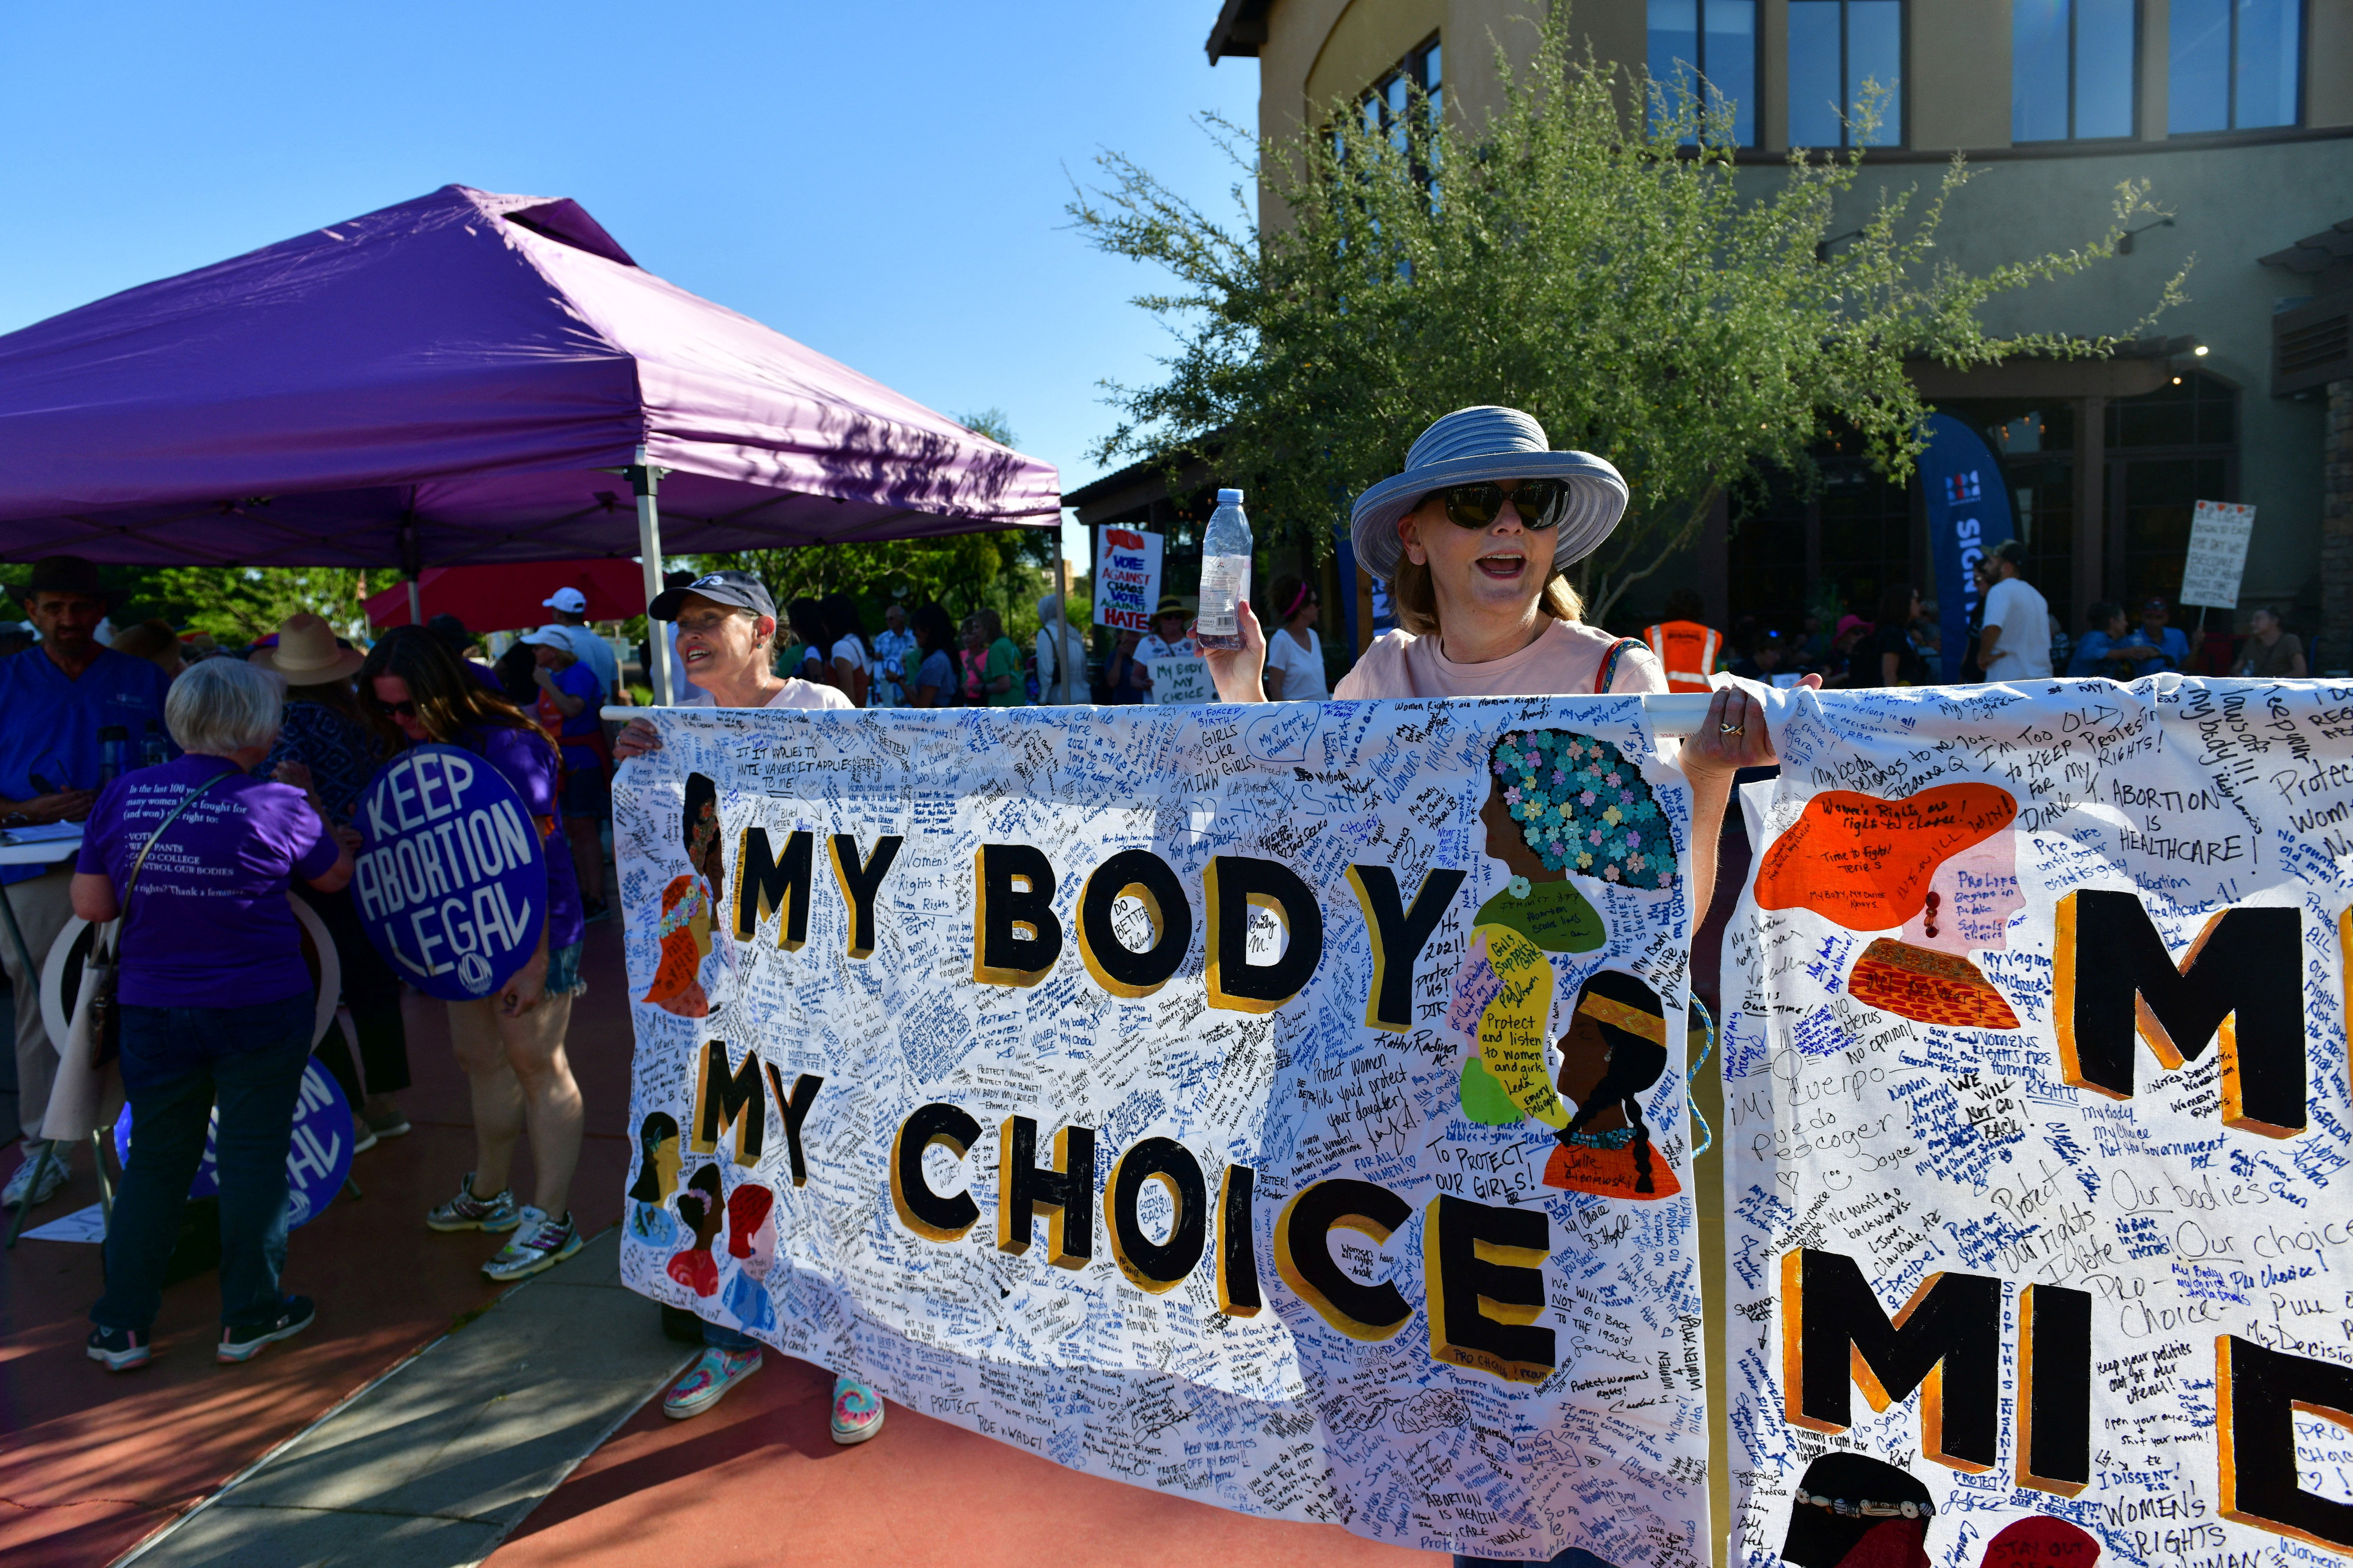 Arizona's Supreme Court revives a law dating back to 1864 that bans abortion in virtually all instances